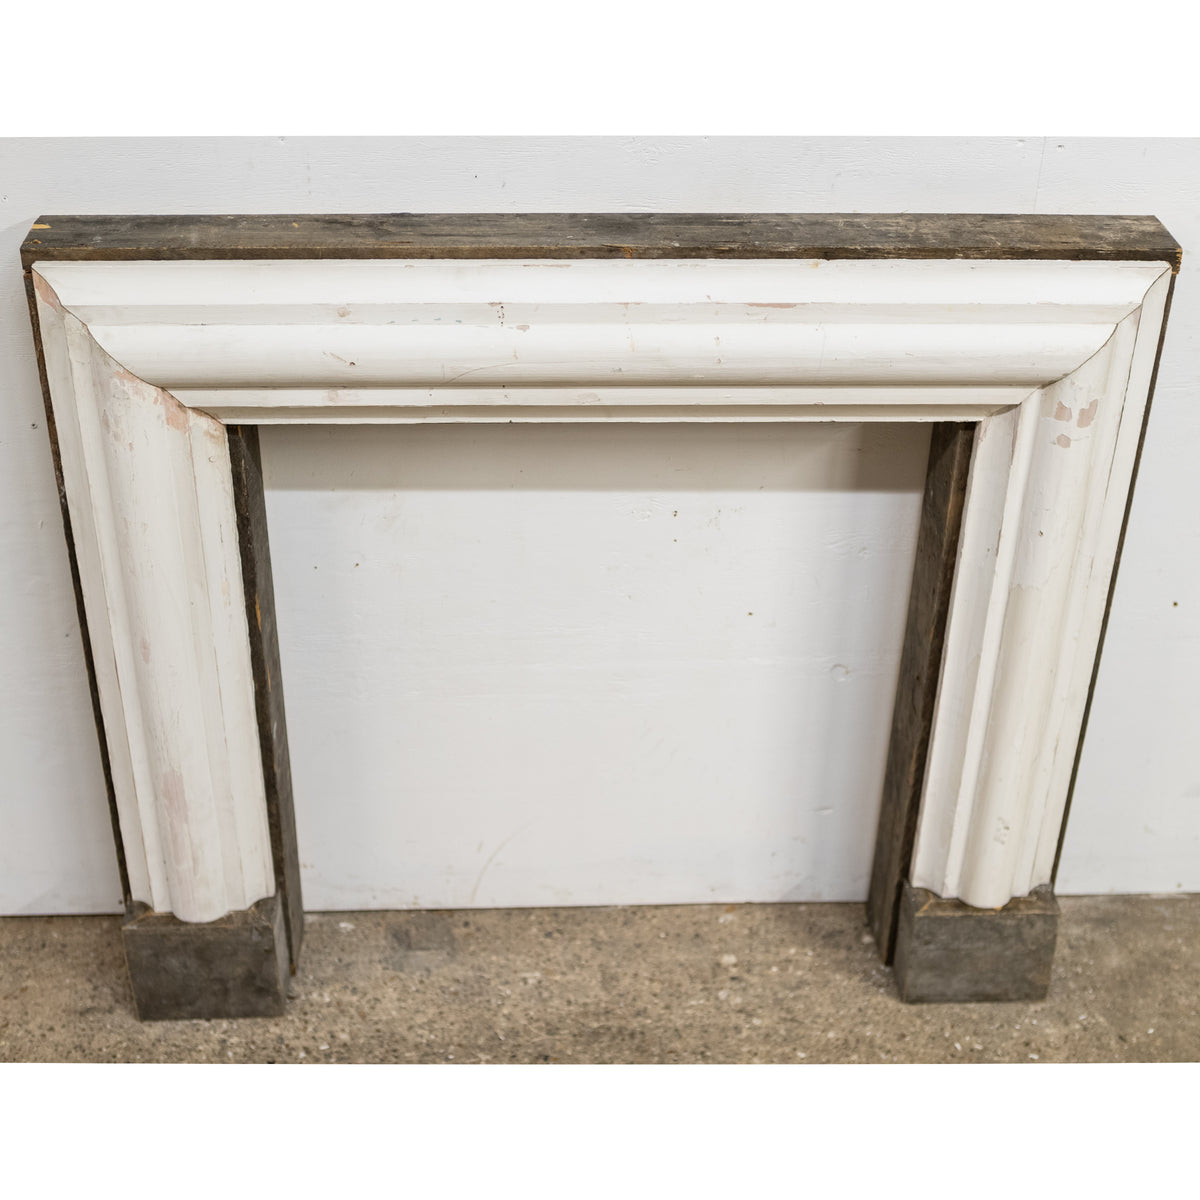 Bolection Fireplace Surround Crafted from Reclaimed Timber | The Architectural Forum